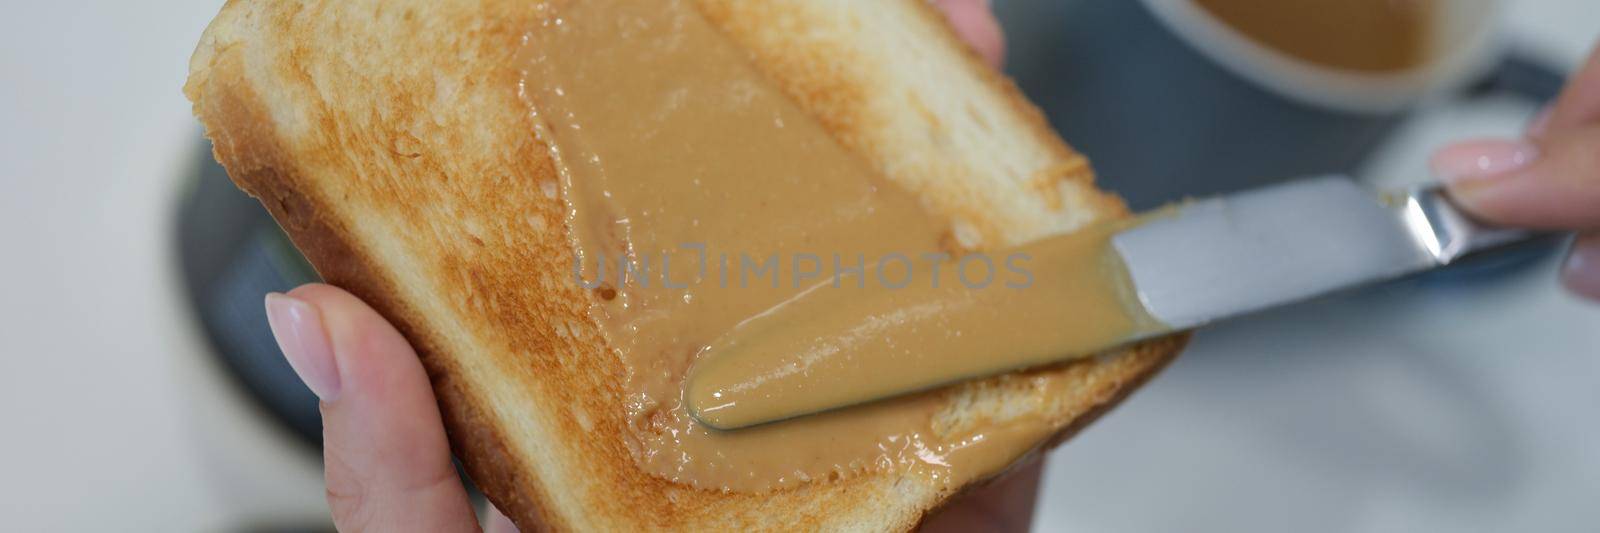 A woman is brushing peanut butter on a toast with a knife, close-up. Chocolate sauce on bread, homemade breakfast